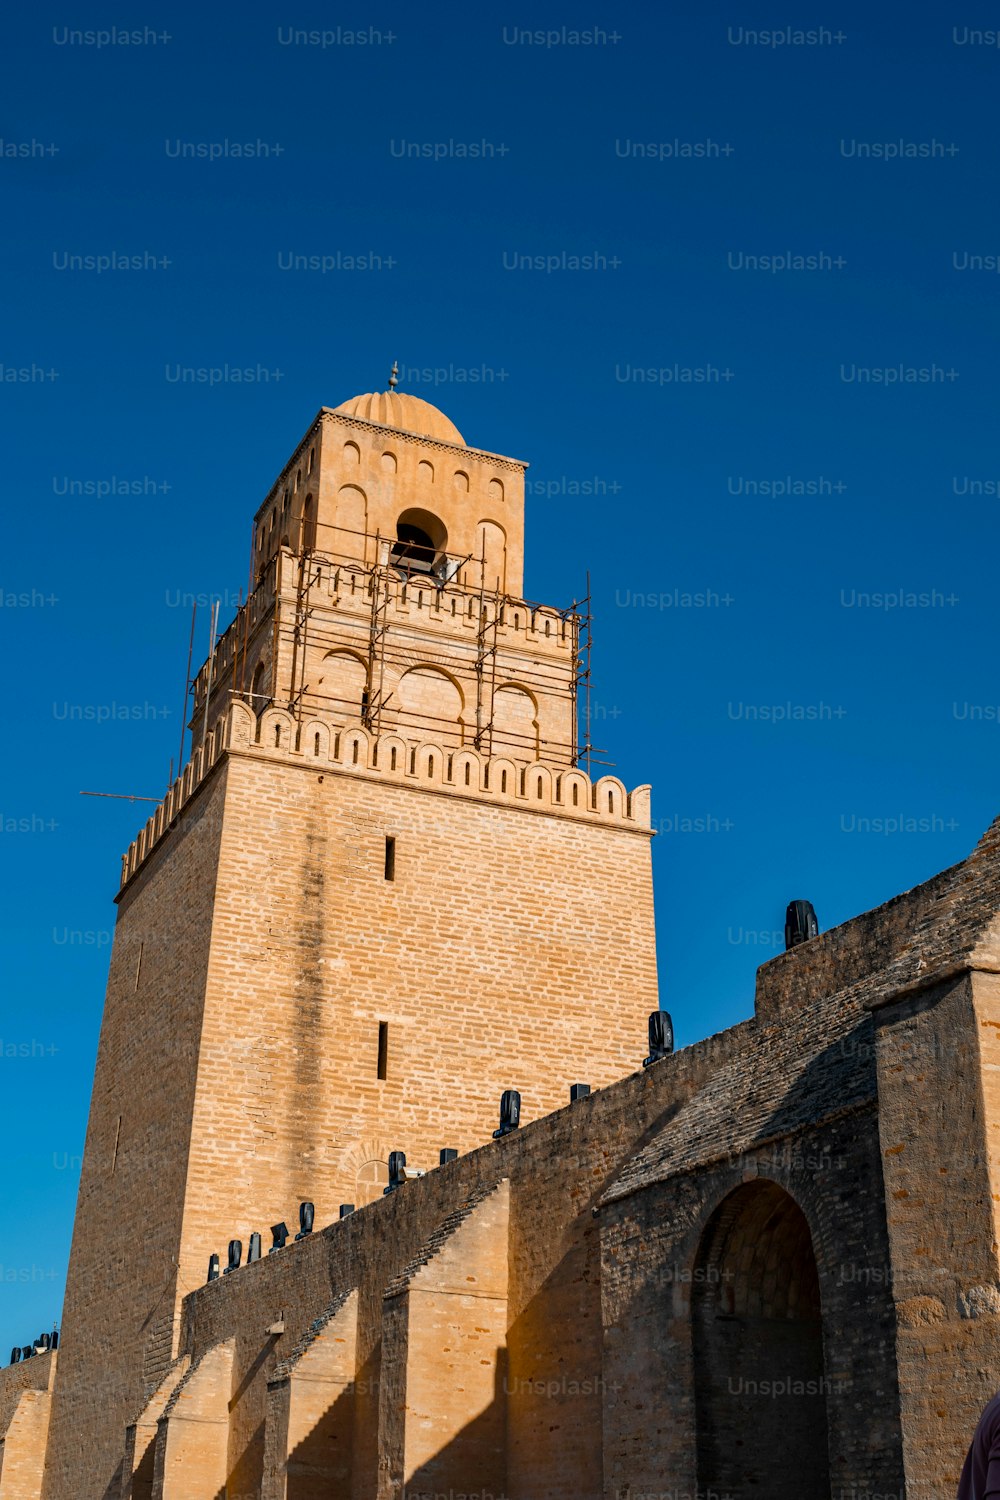 A low angle shot of the Great Mosque of Kairouan in Tunisia